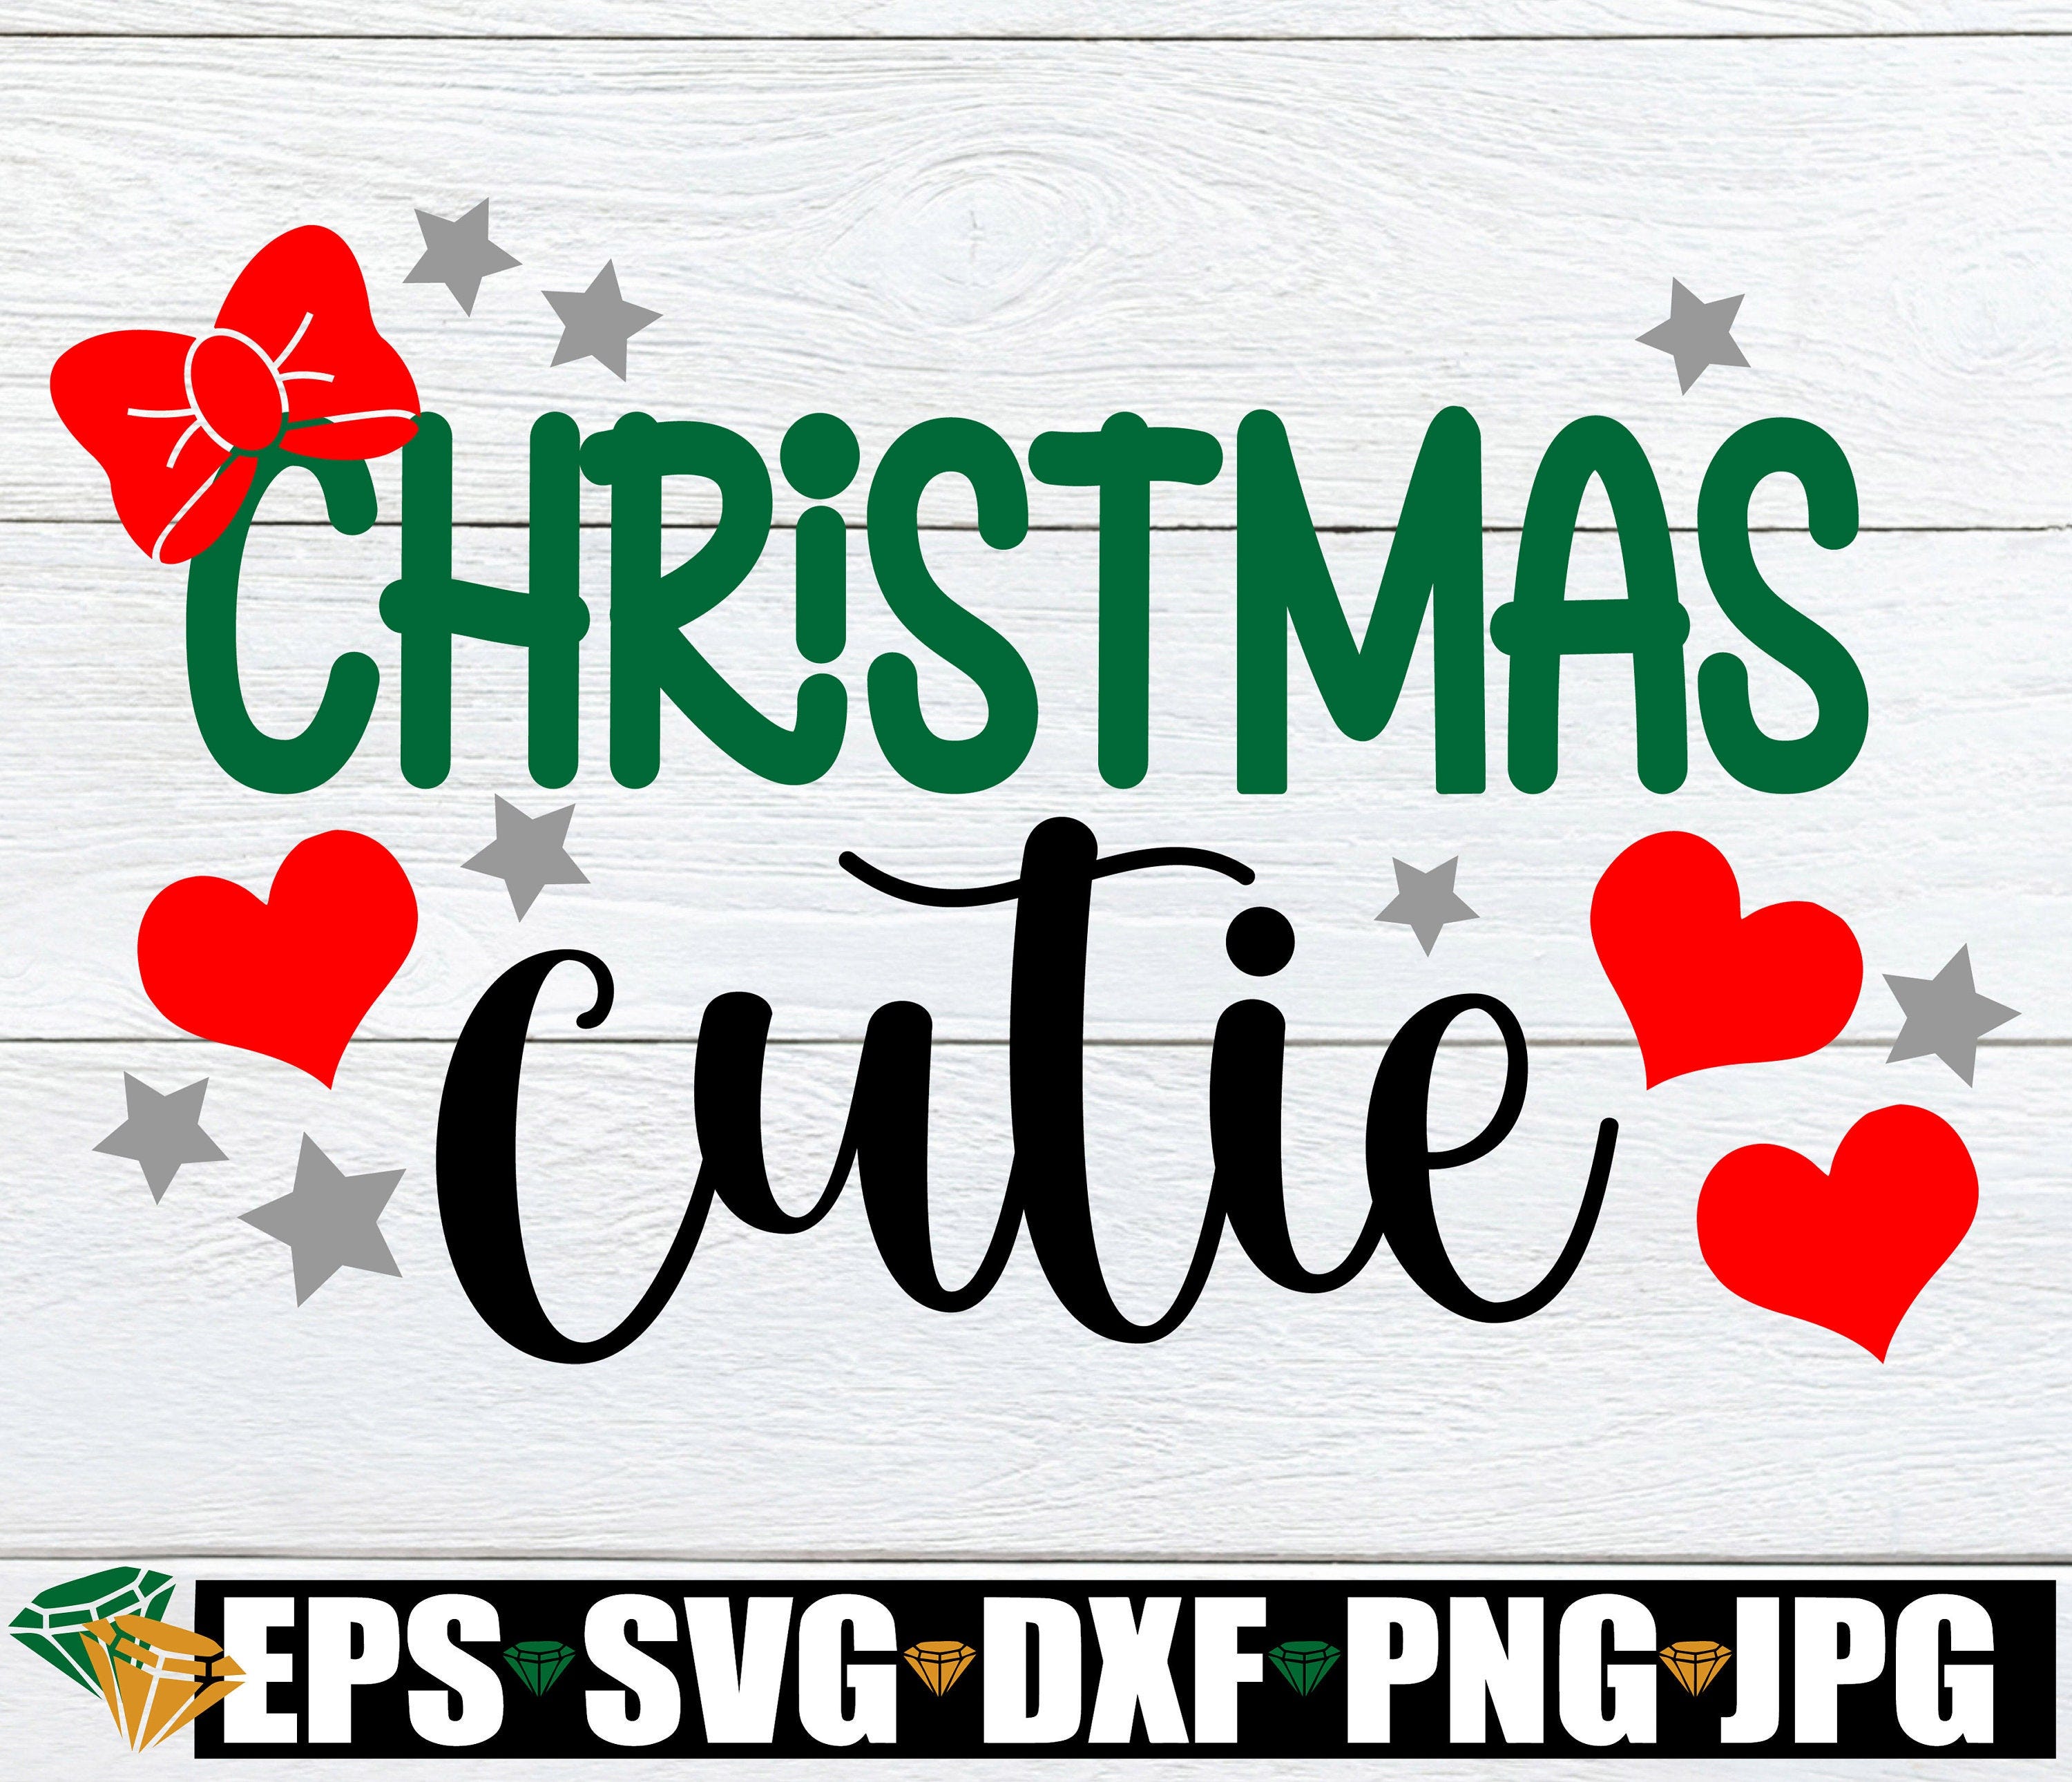 Christmas Cutie, Christmas svg, Girls Christmas Shirt svg, Girls Christmas, Kids Christmas, Cute Christmas svg, Cut FIle, svg png dxf